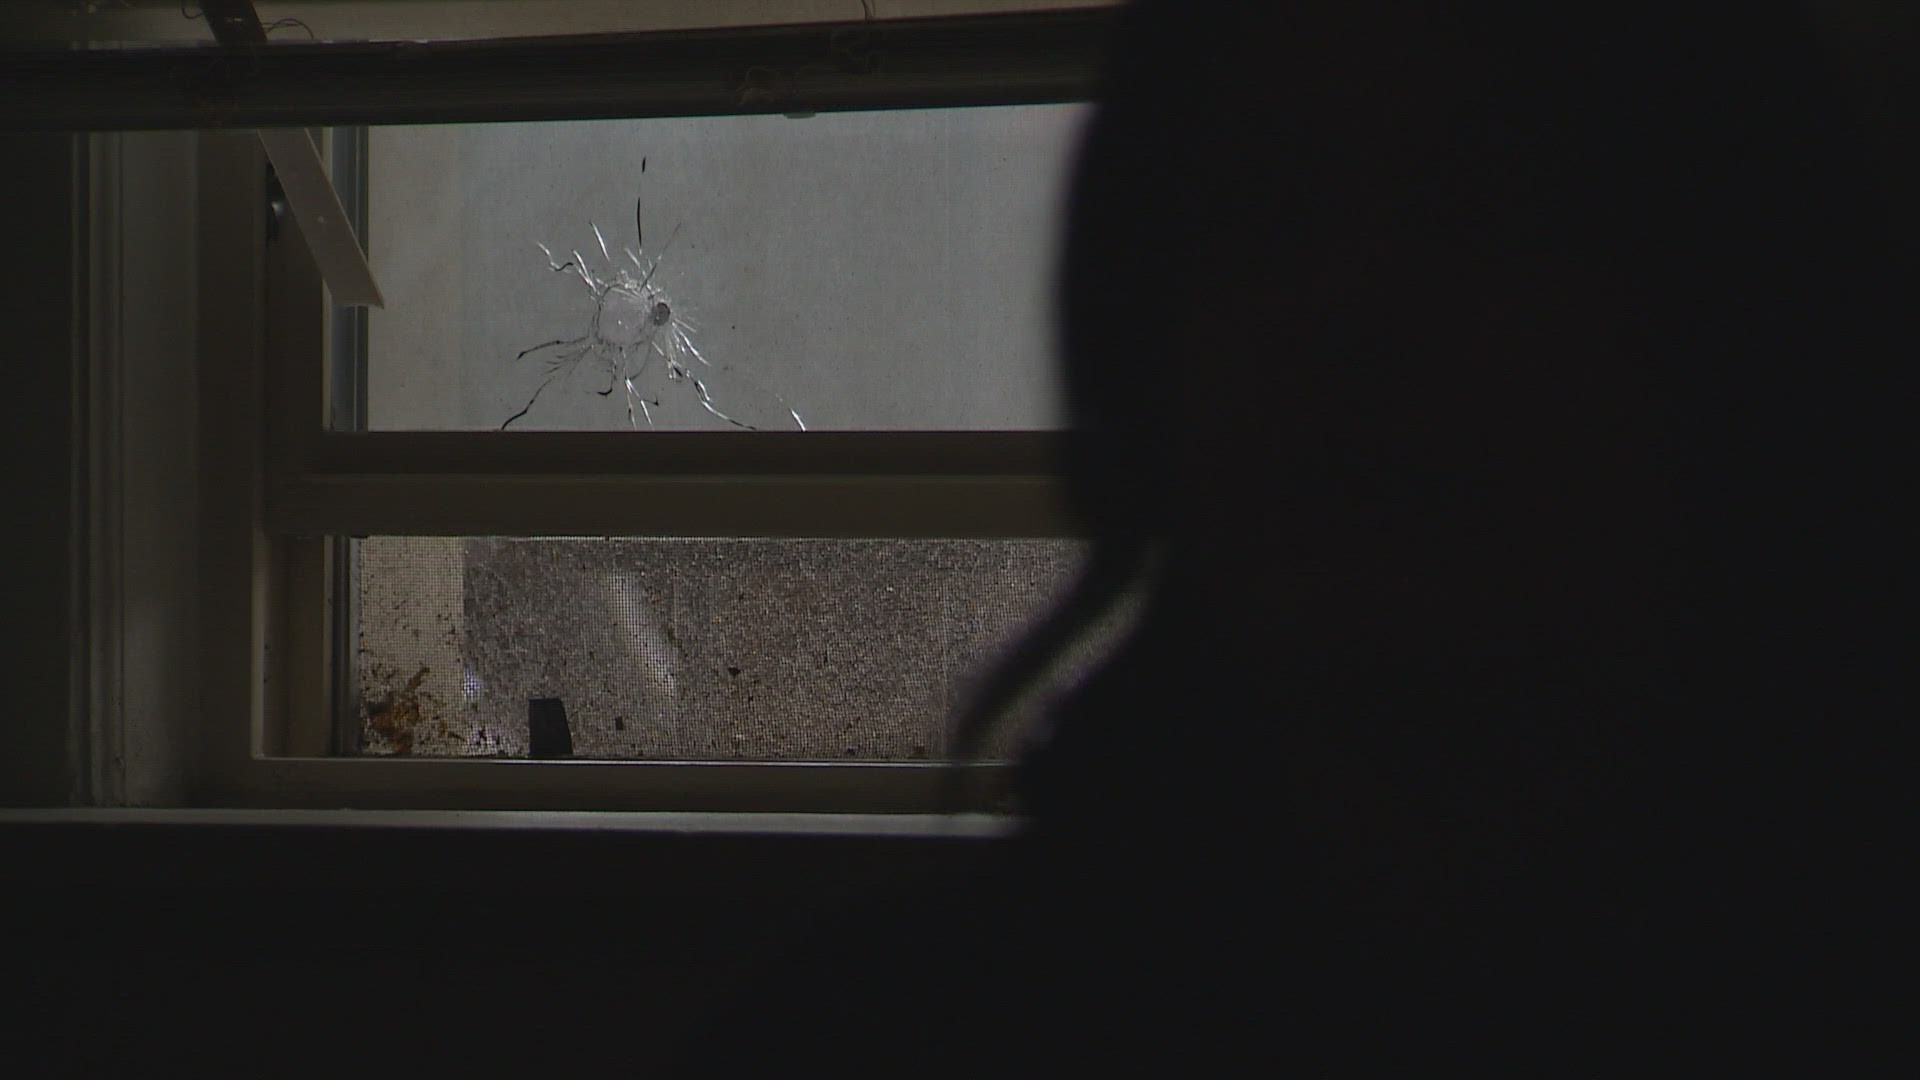 Bullets flew inches from the head of a young woman who was minding her own business in her apartment late Monday.